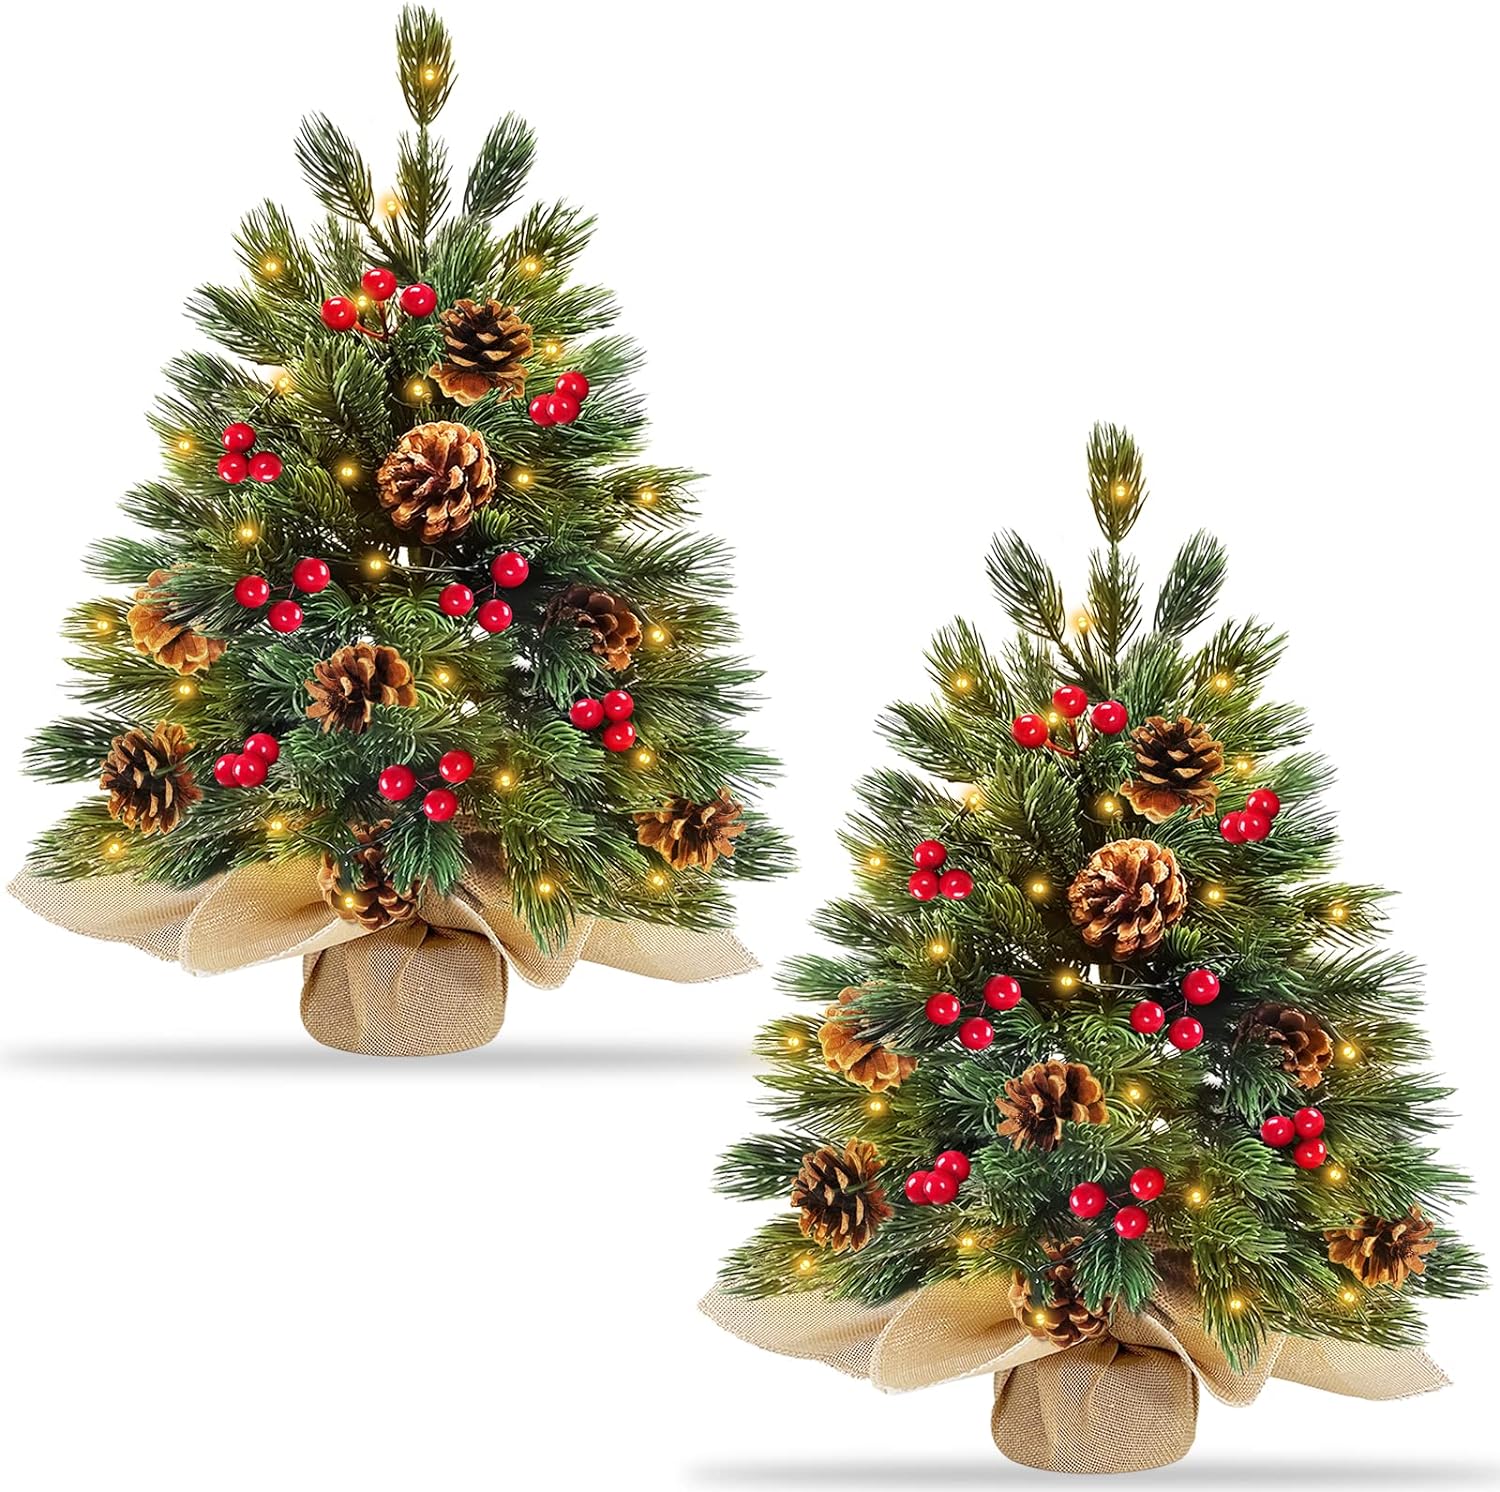 20 Inch Snow Flocked Prelit Christmas Tabletop Tree Review